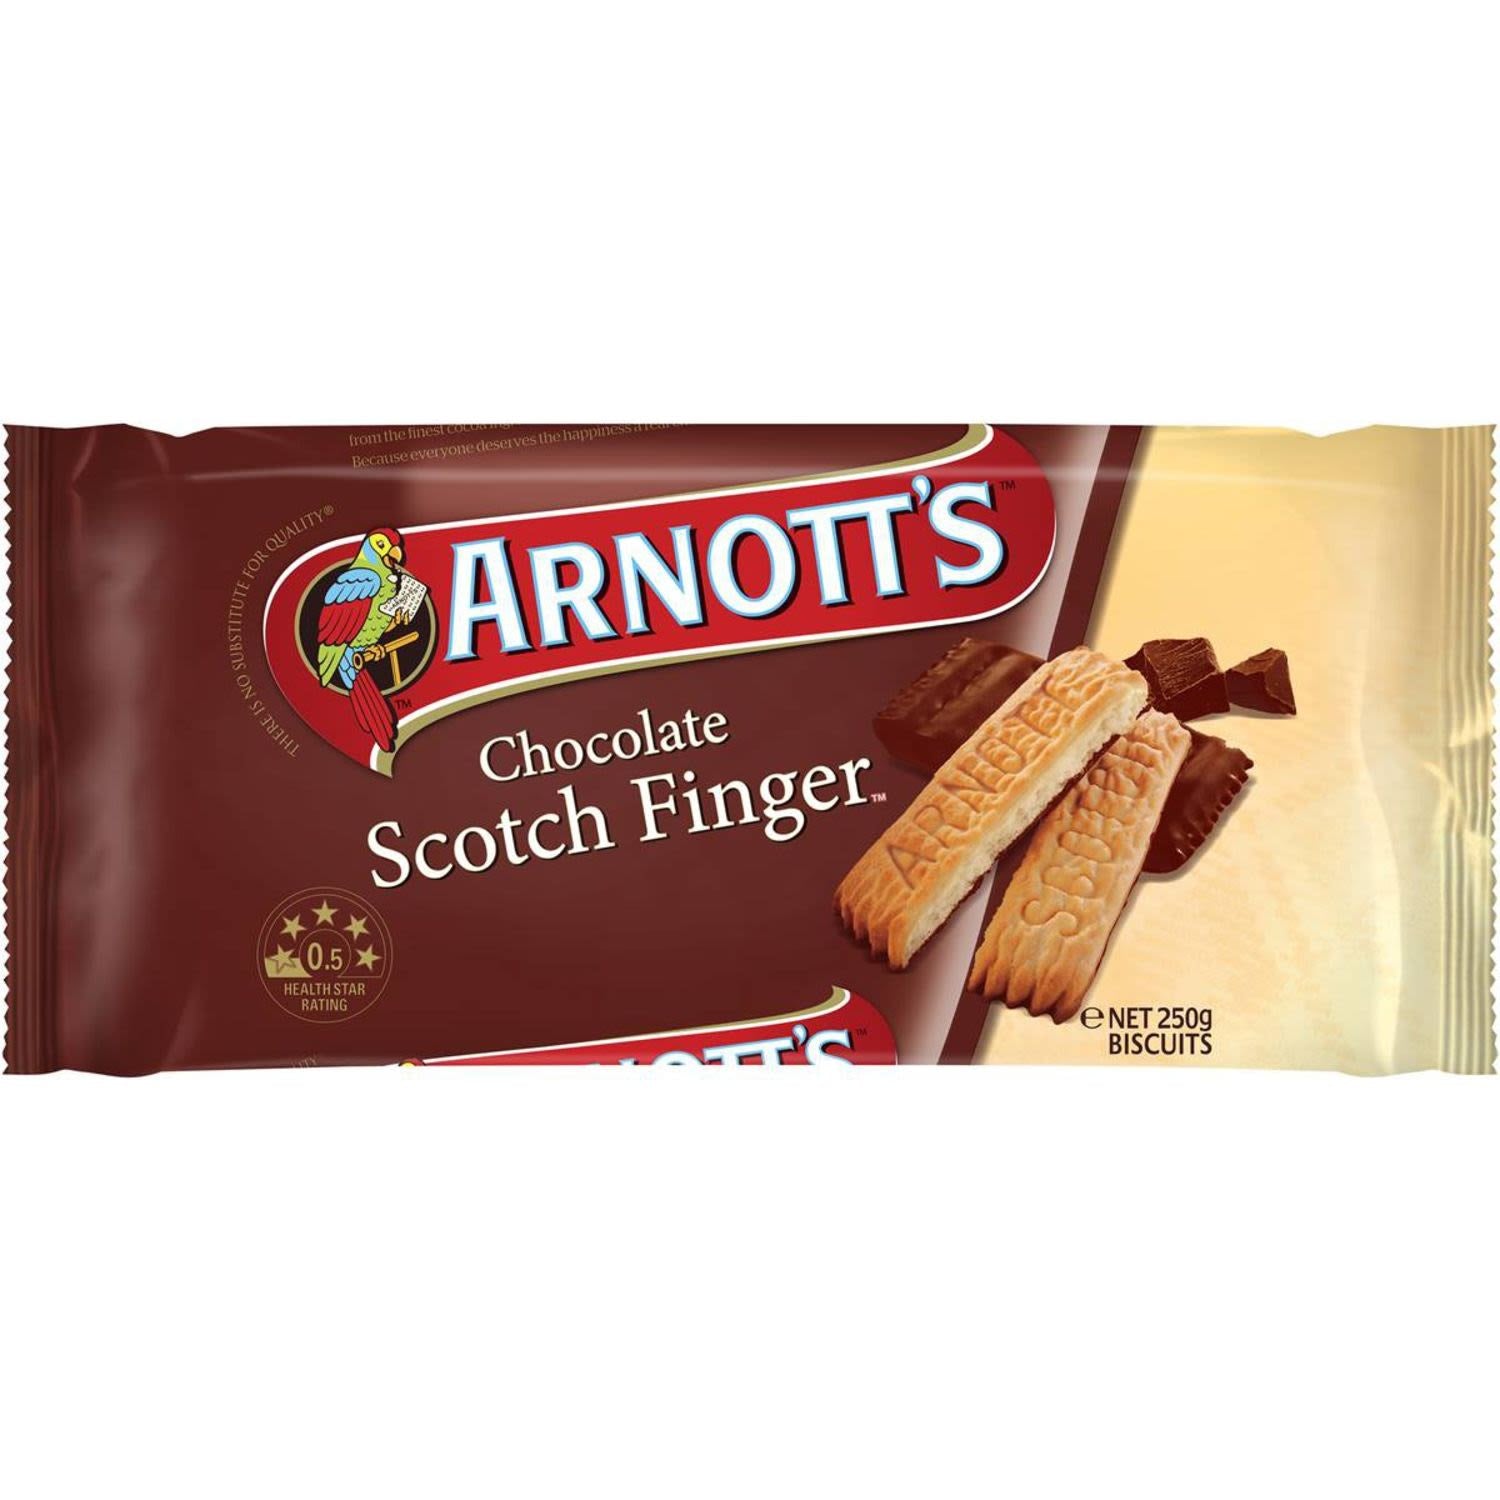 Arnotts Scotch Finger Chocolate Biscuits 250g